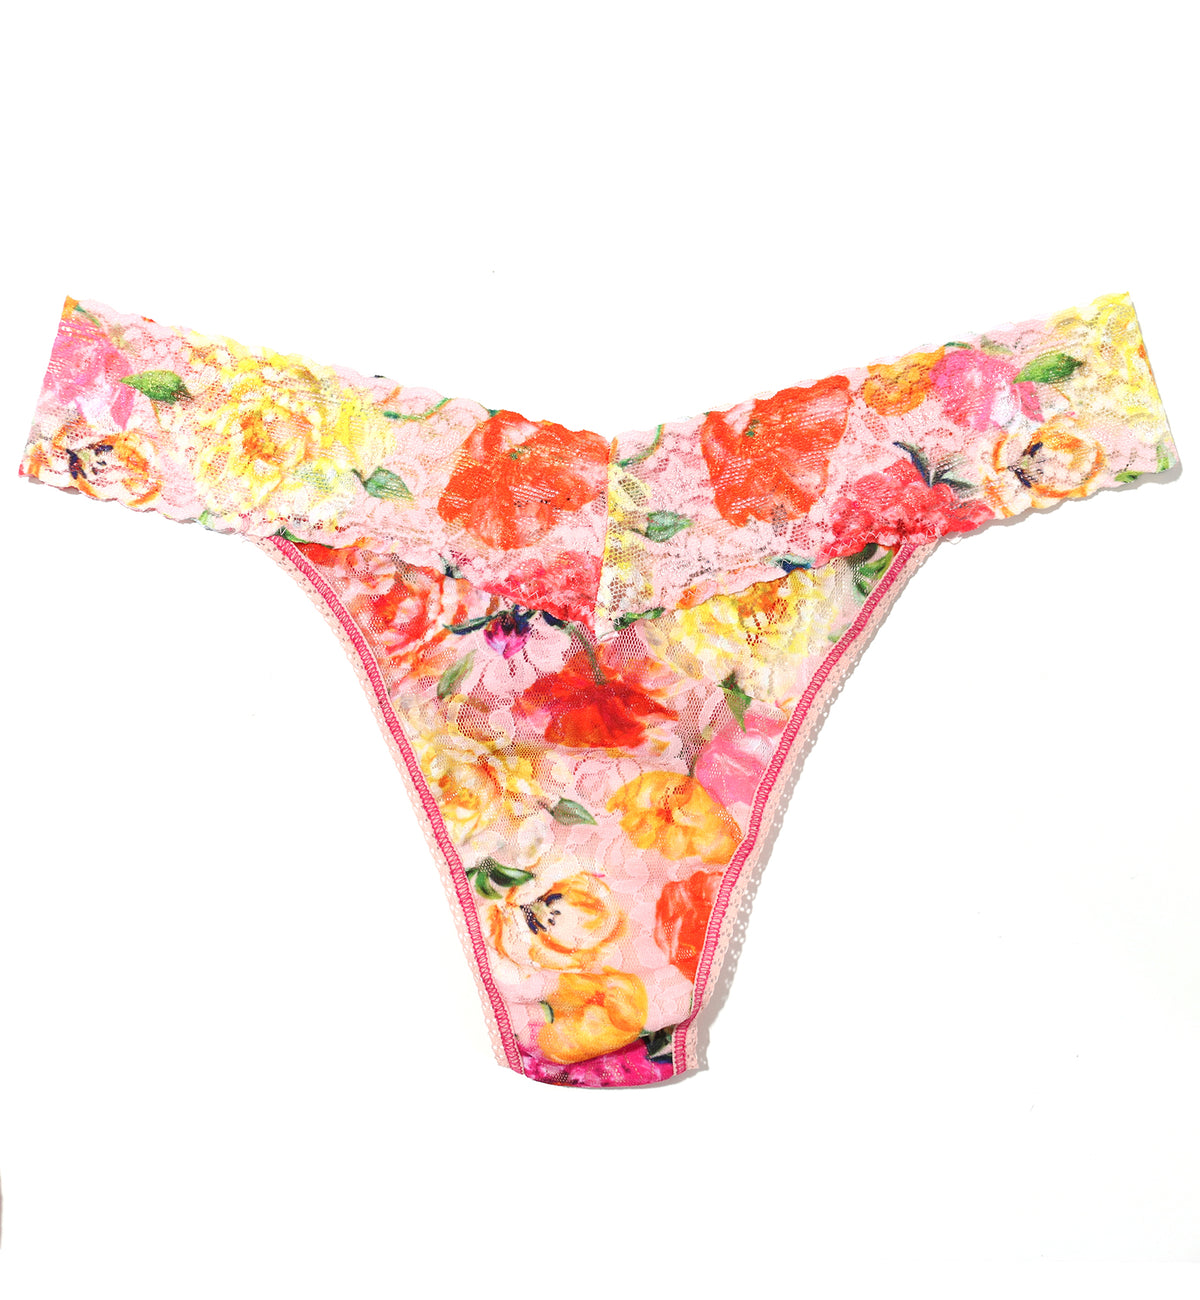 Hanky Panky Signature Lace Printed Original Rise Thong (PR4811P),Bring Me Flowers - Bring Me Flowers,One Size